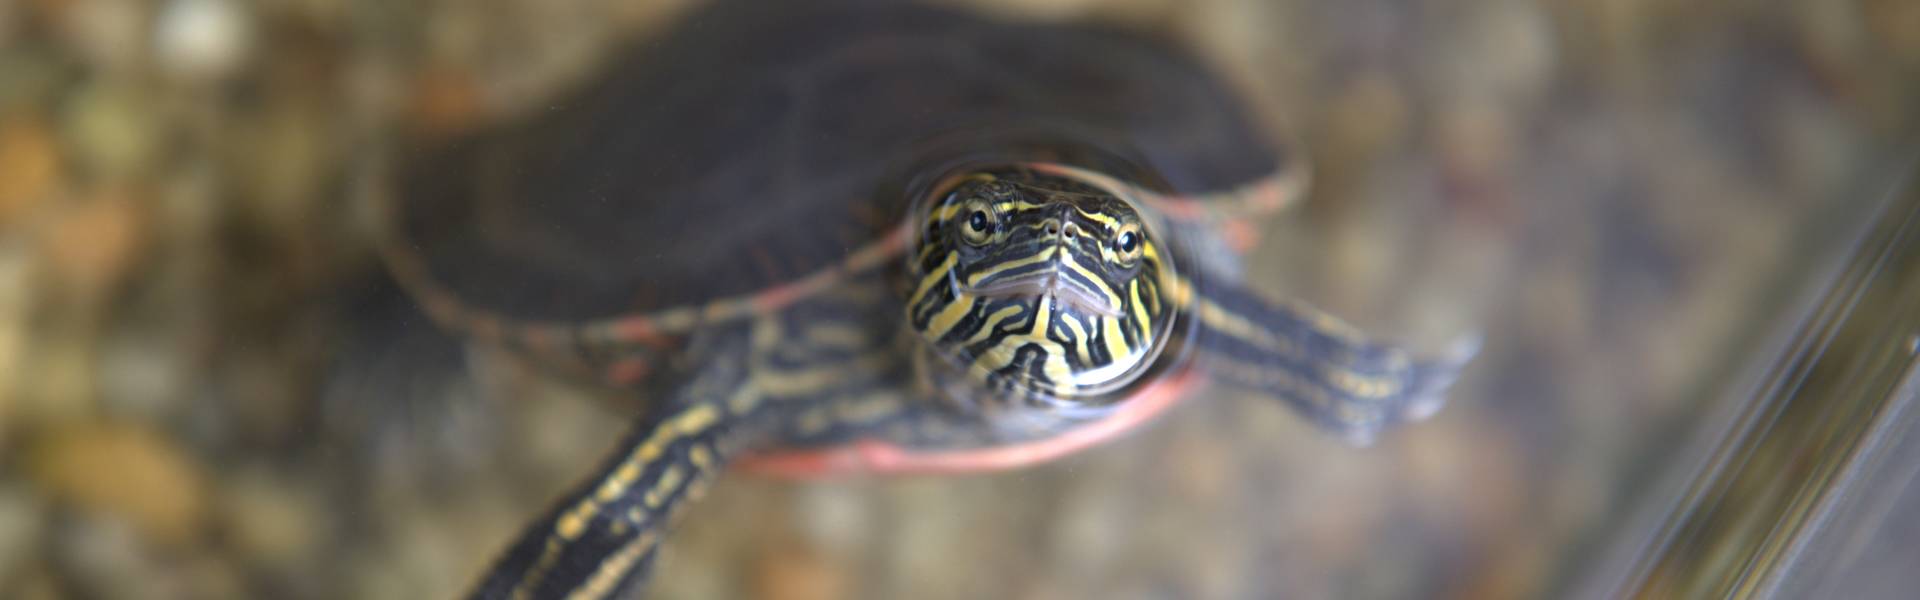 A turtle with yellow and black stripes sticks his face out of water.